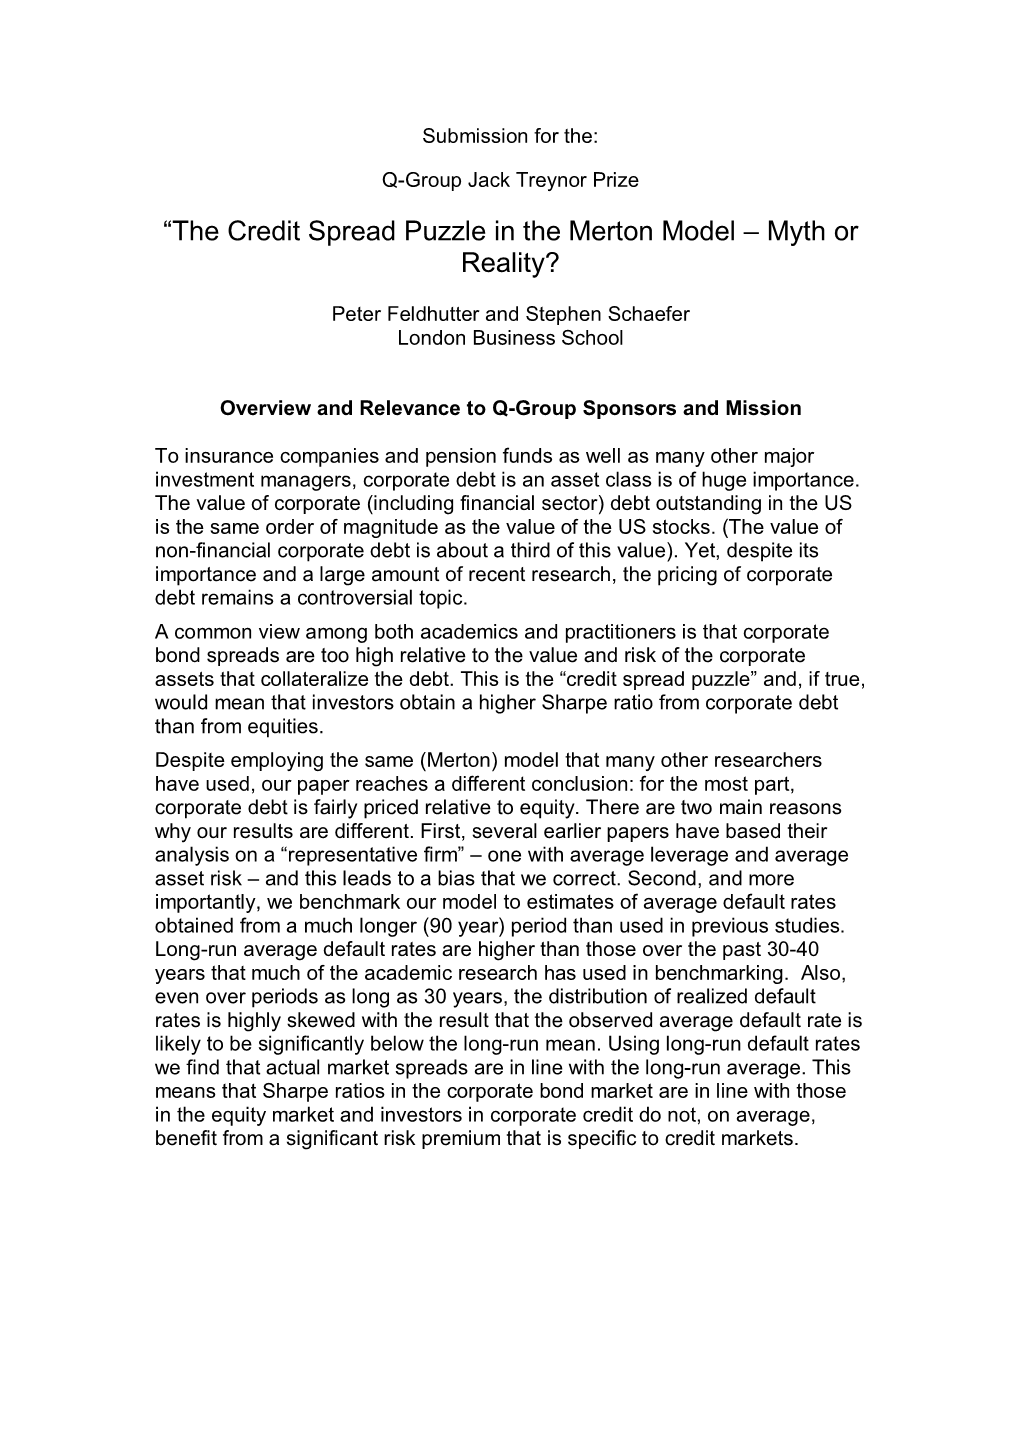 “The Credit Spread Puzzle in the Merton Model – Myth Or Reality?